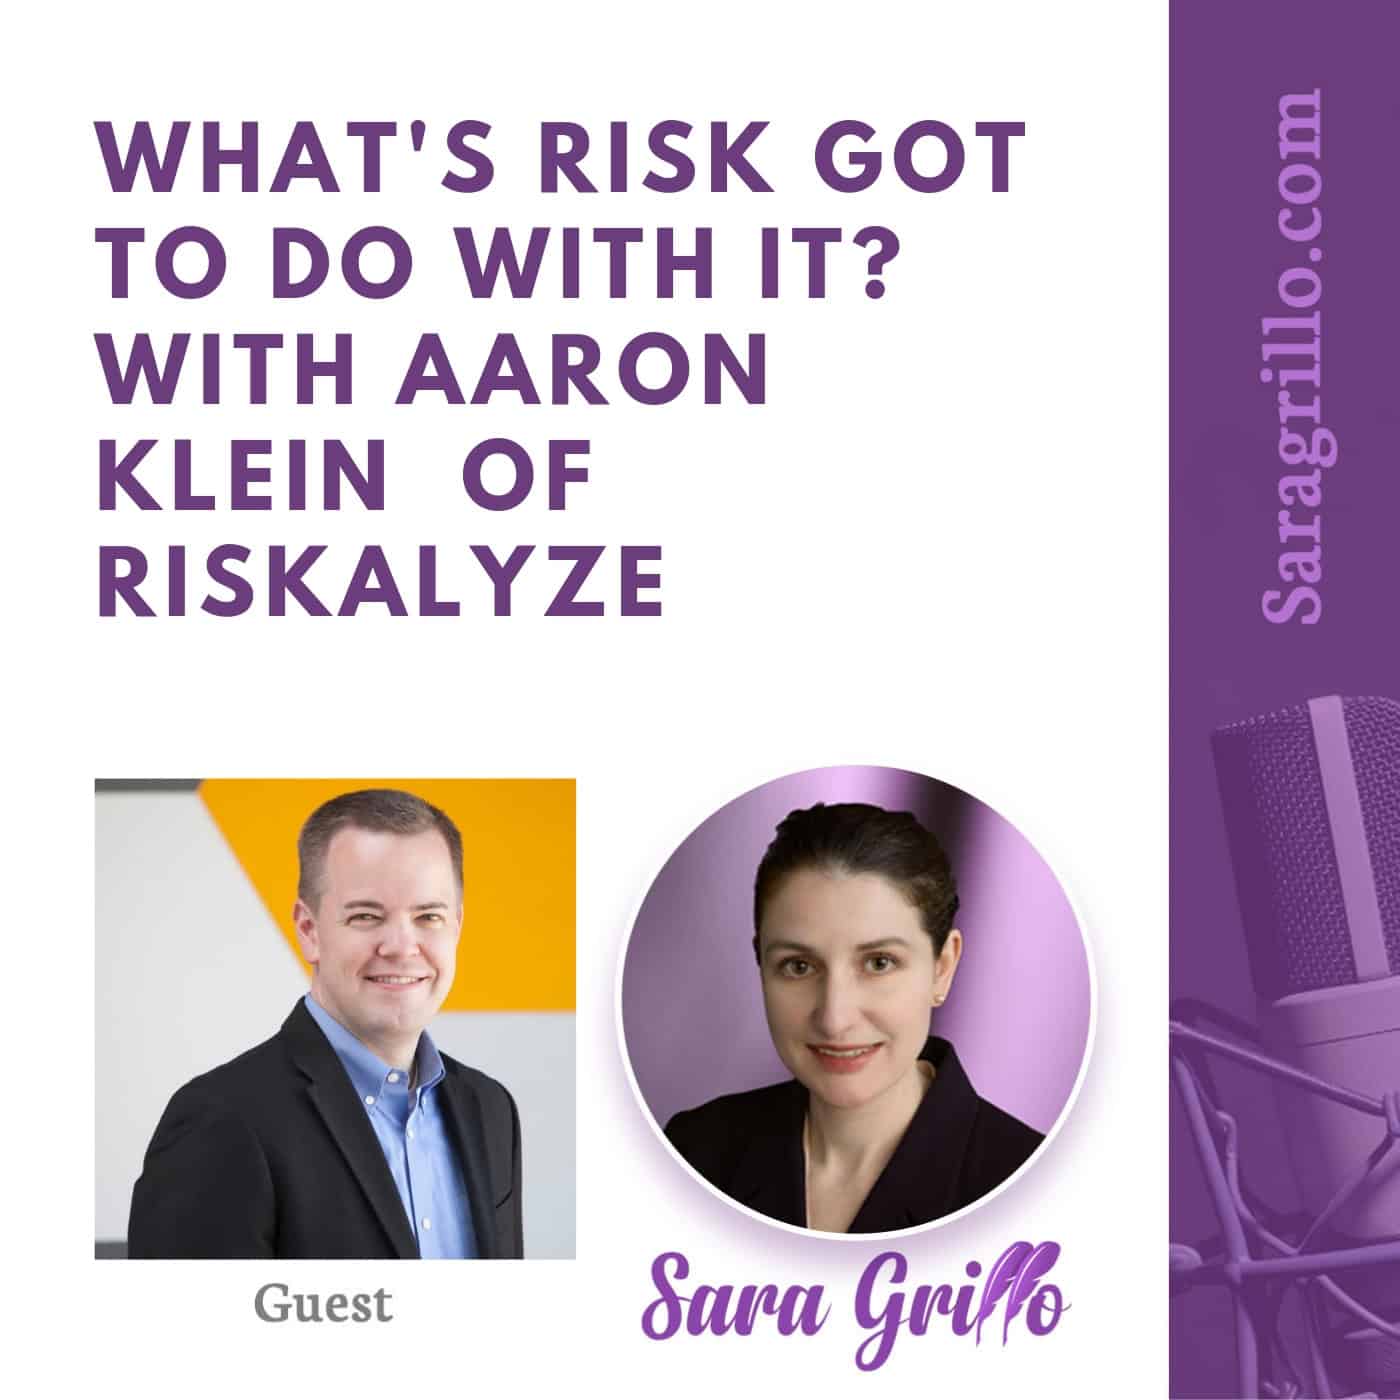 This podcast discusses a better way for financial advisors to assess risk with Aaron Klein.